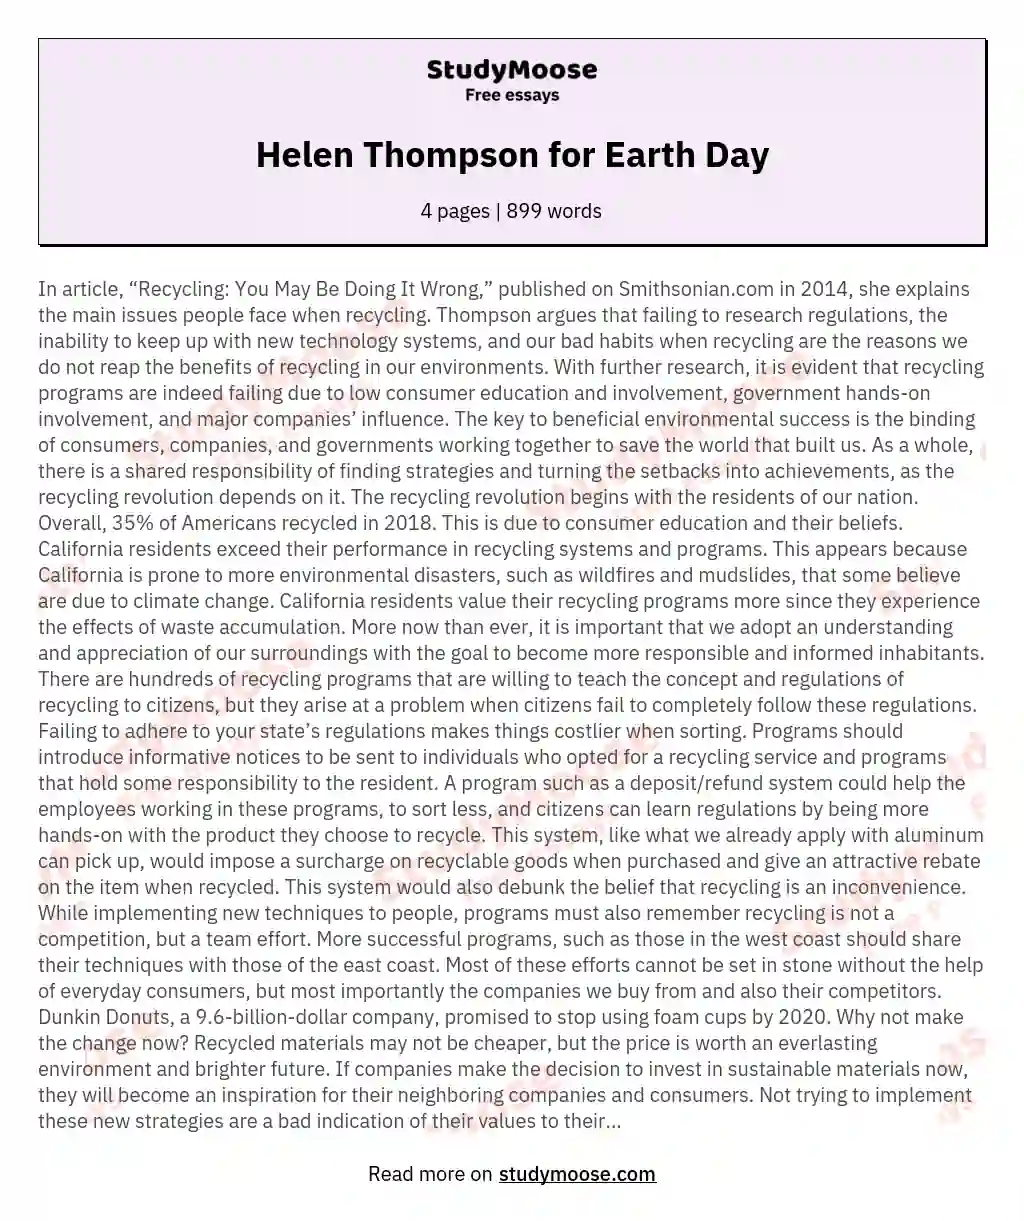 Helen Thompson for Earth Day essay